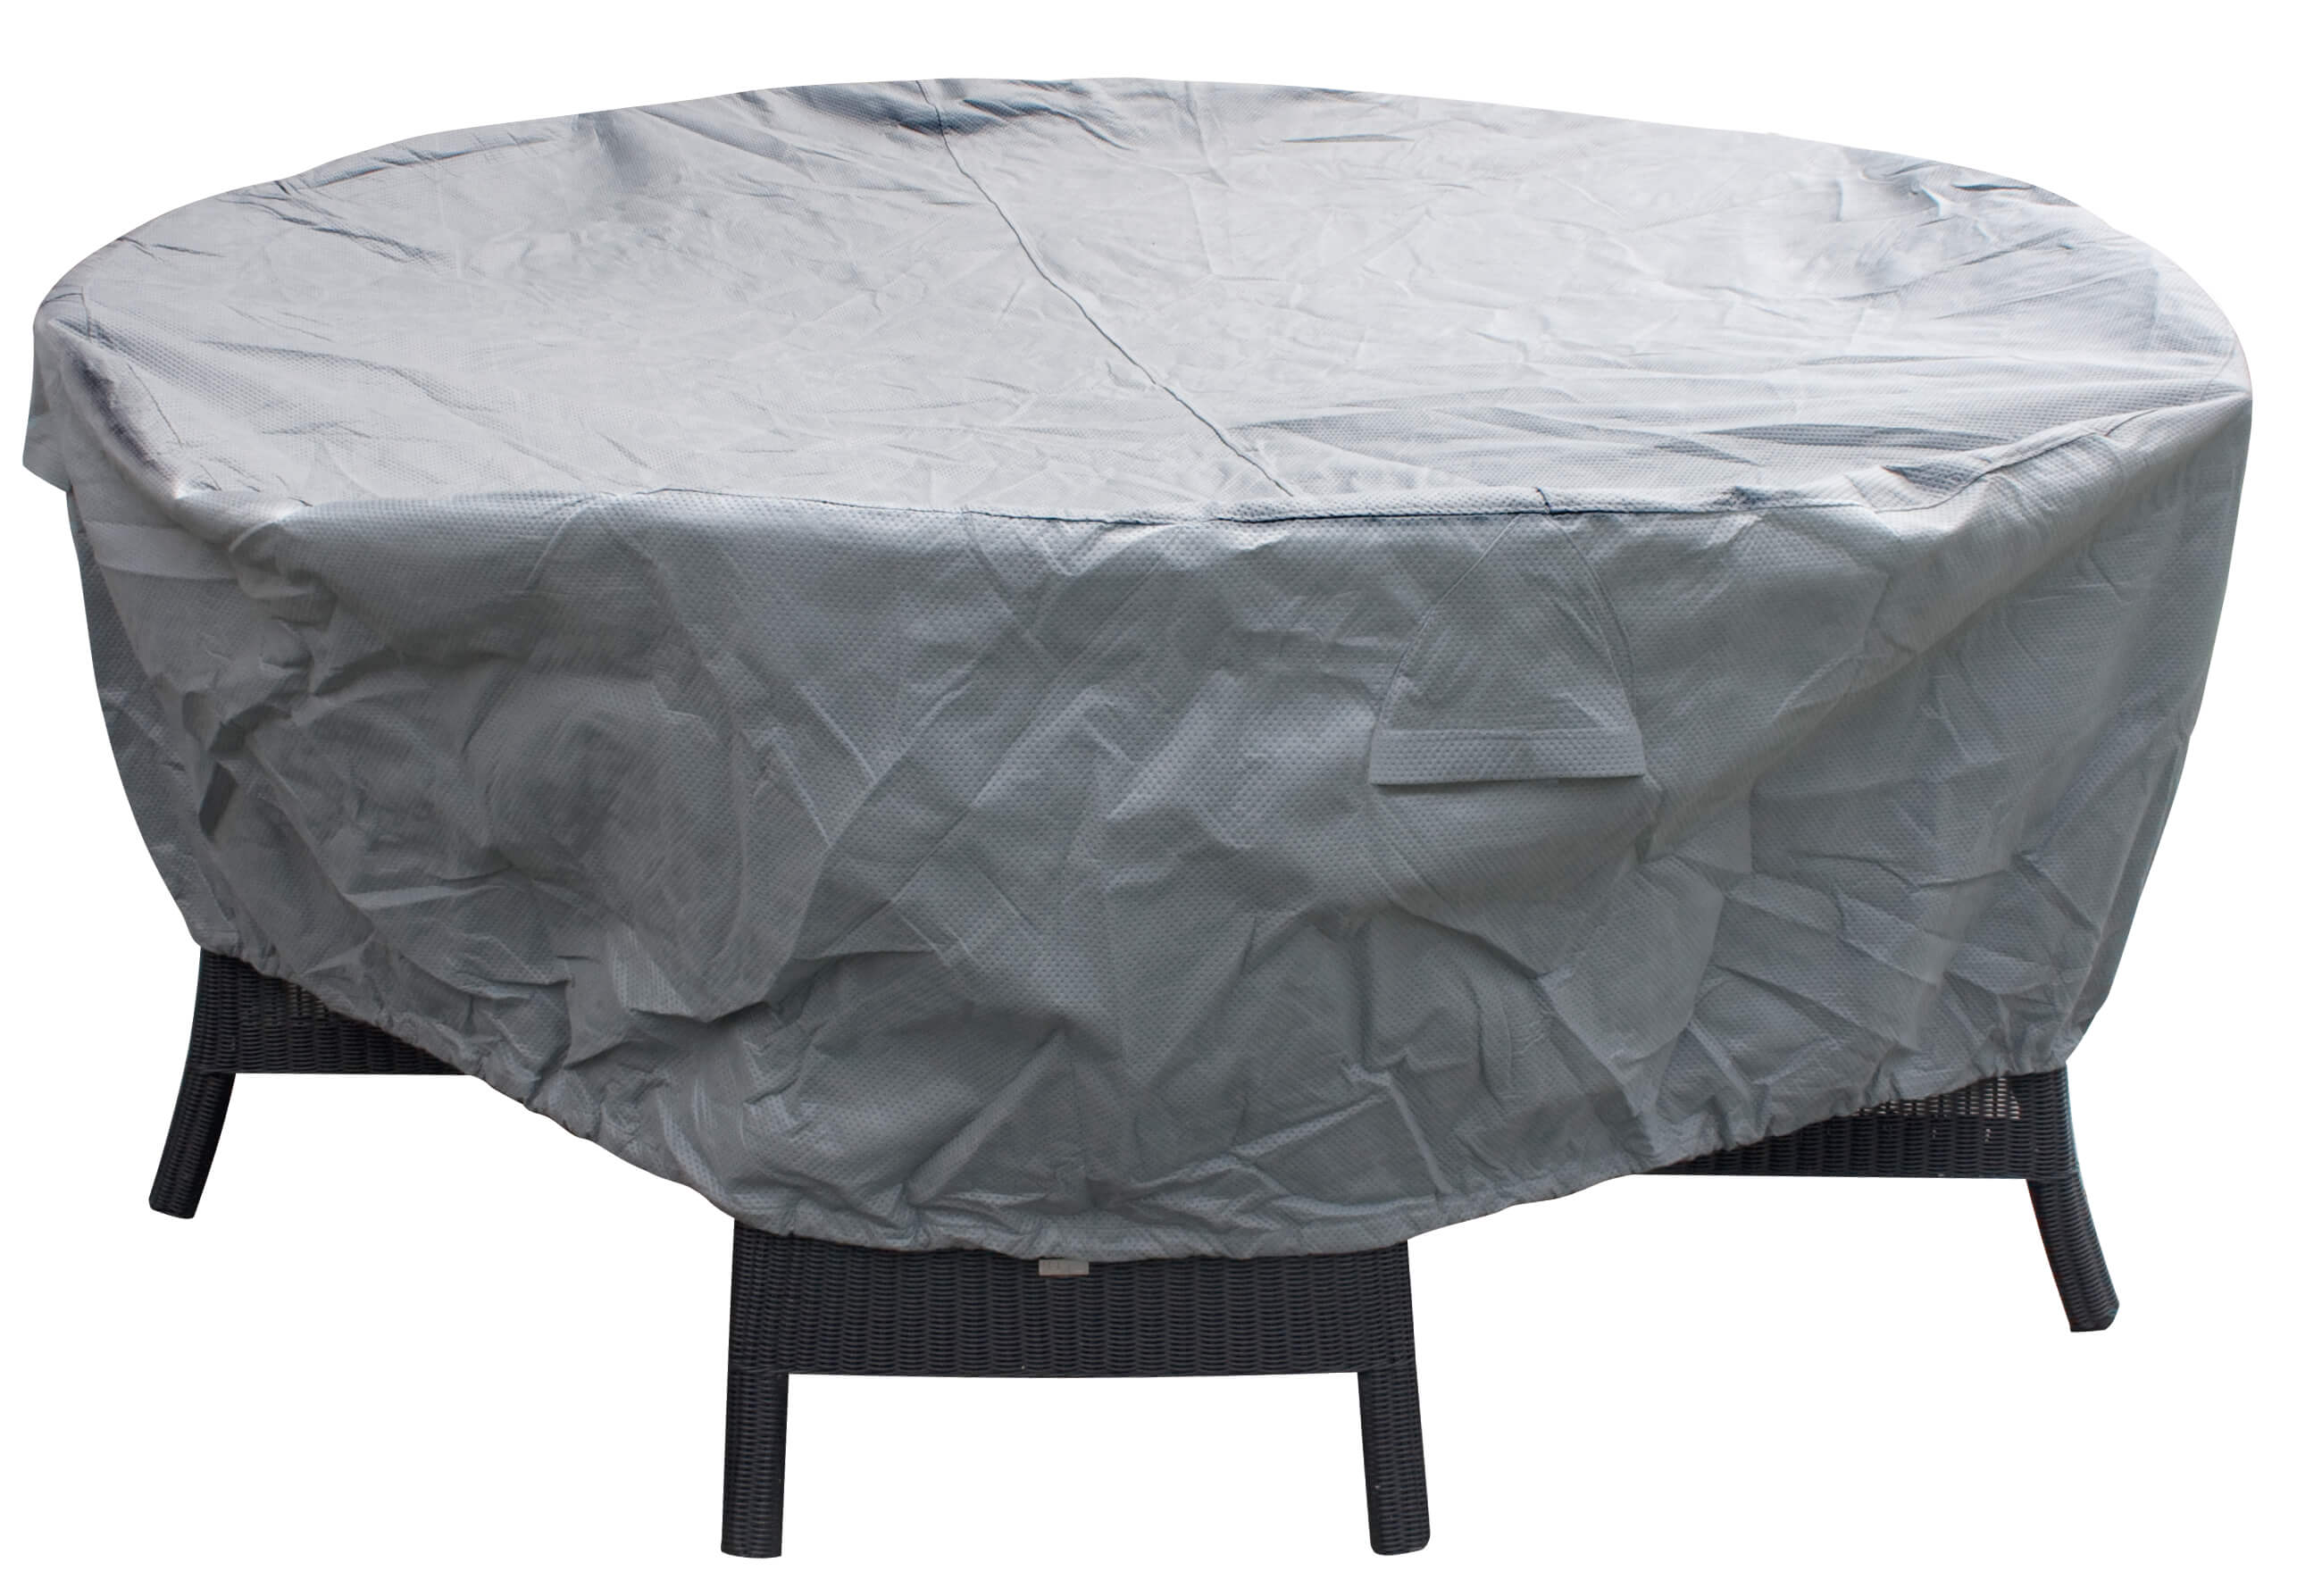 Weather cover for a round furniture set Ø 260 x 100 cm